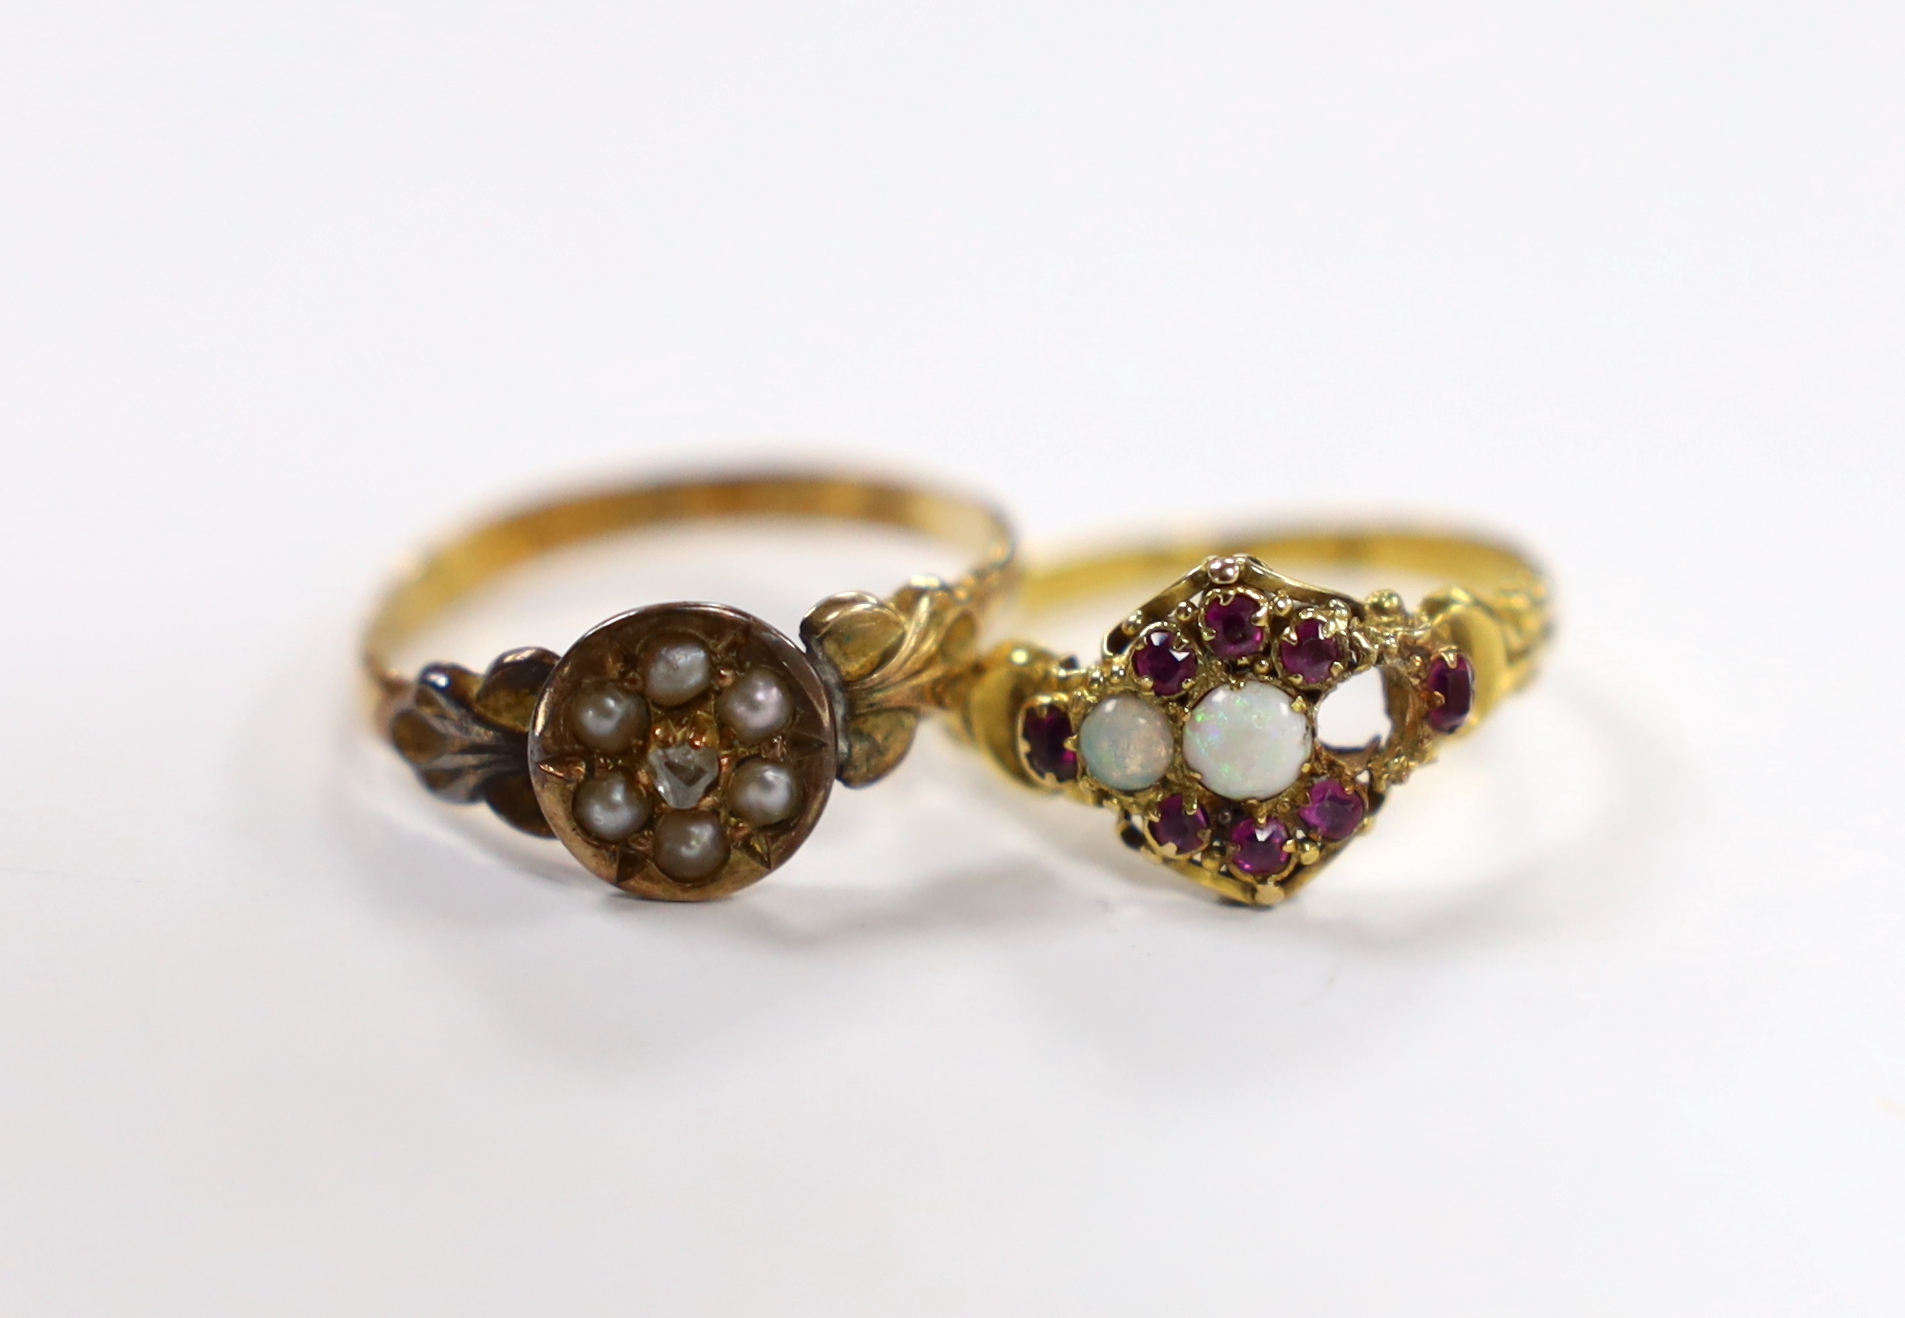 A Victorian 18ct gold, white opal and garnet cluster set dress ring, (opal missing), size J/K, gross weight 1.9 grams and a 15ct gold, seed pearl and rose cut diamond cluster set ring gross weight 1.7 grams.